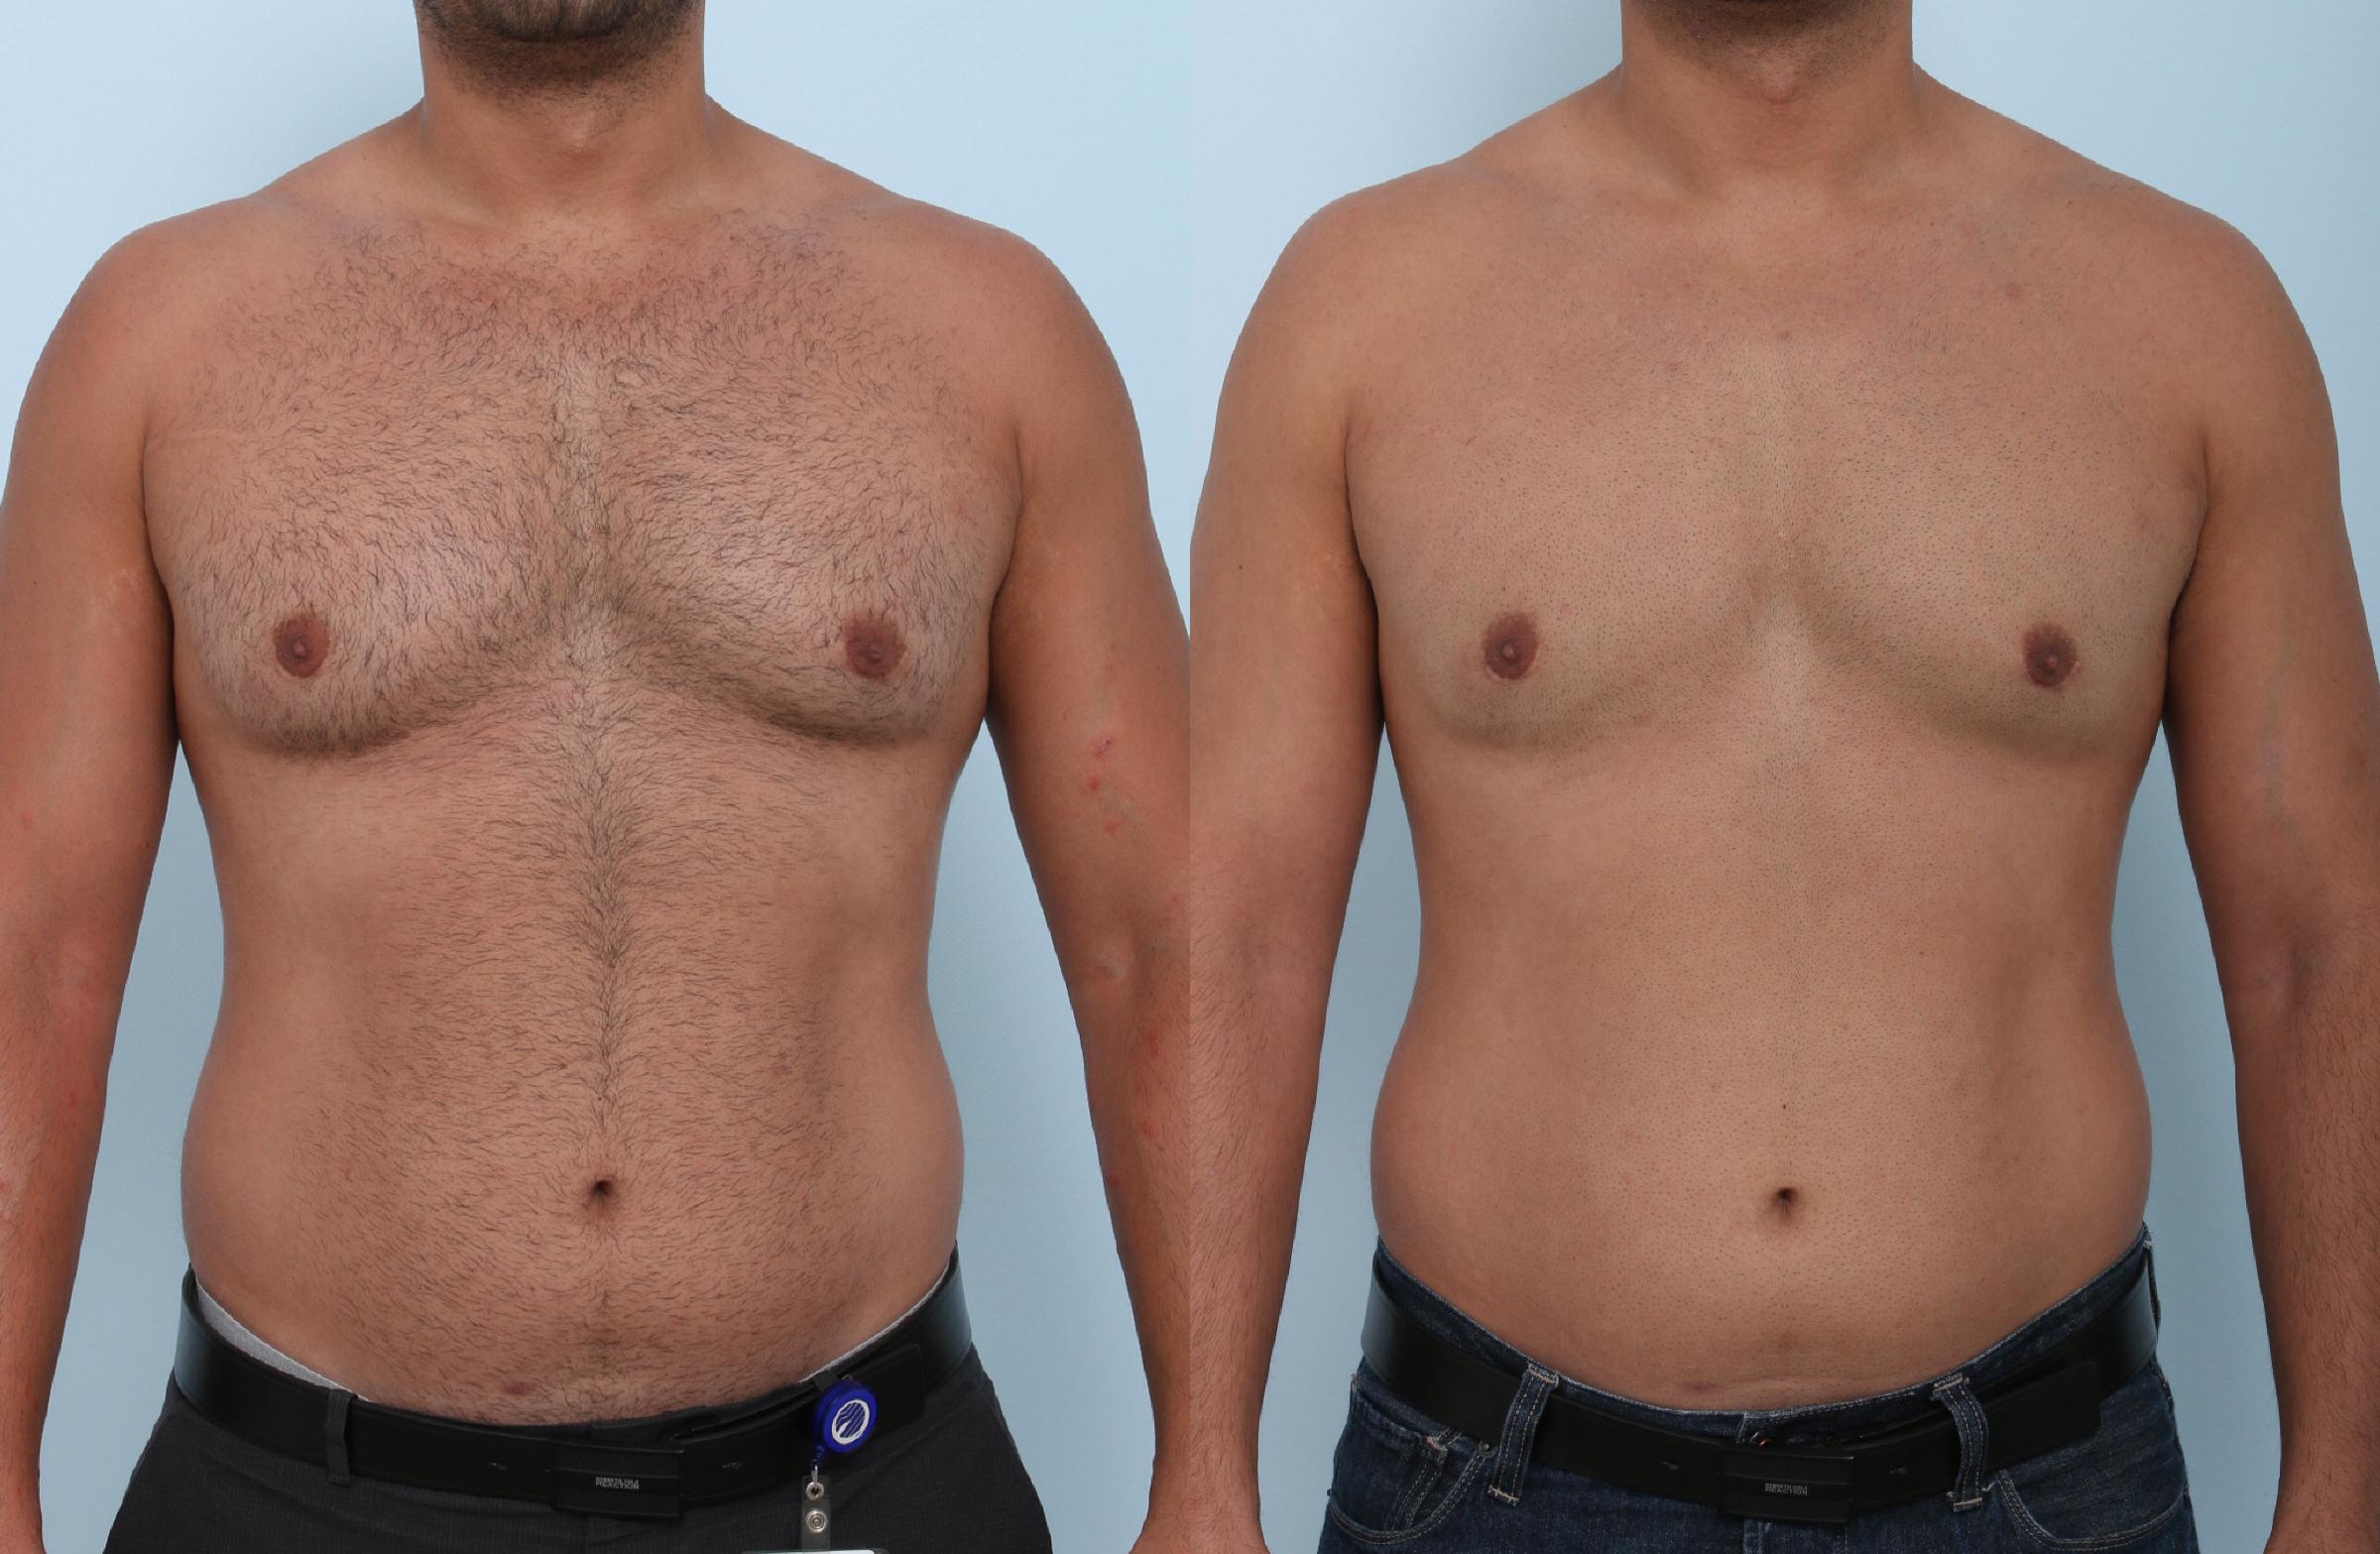  before and after pictures in , , The Truth Behind the Five Most Common CoolSculpting Myths